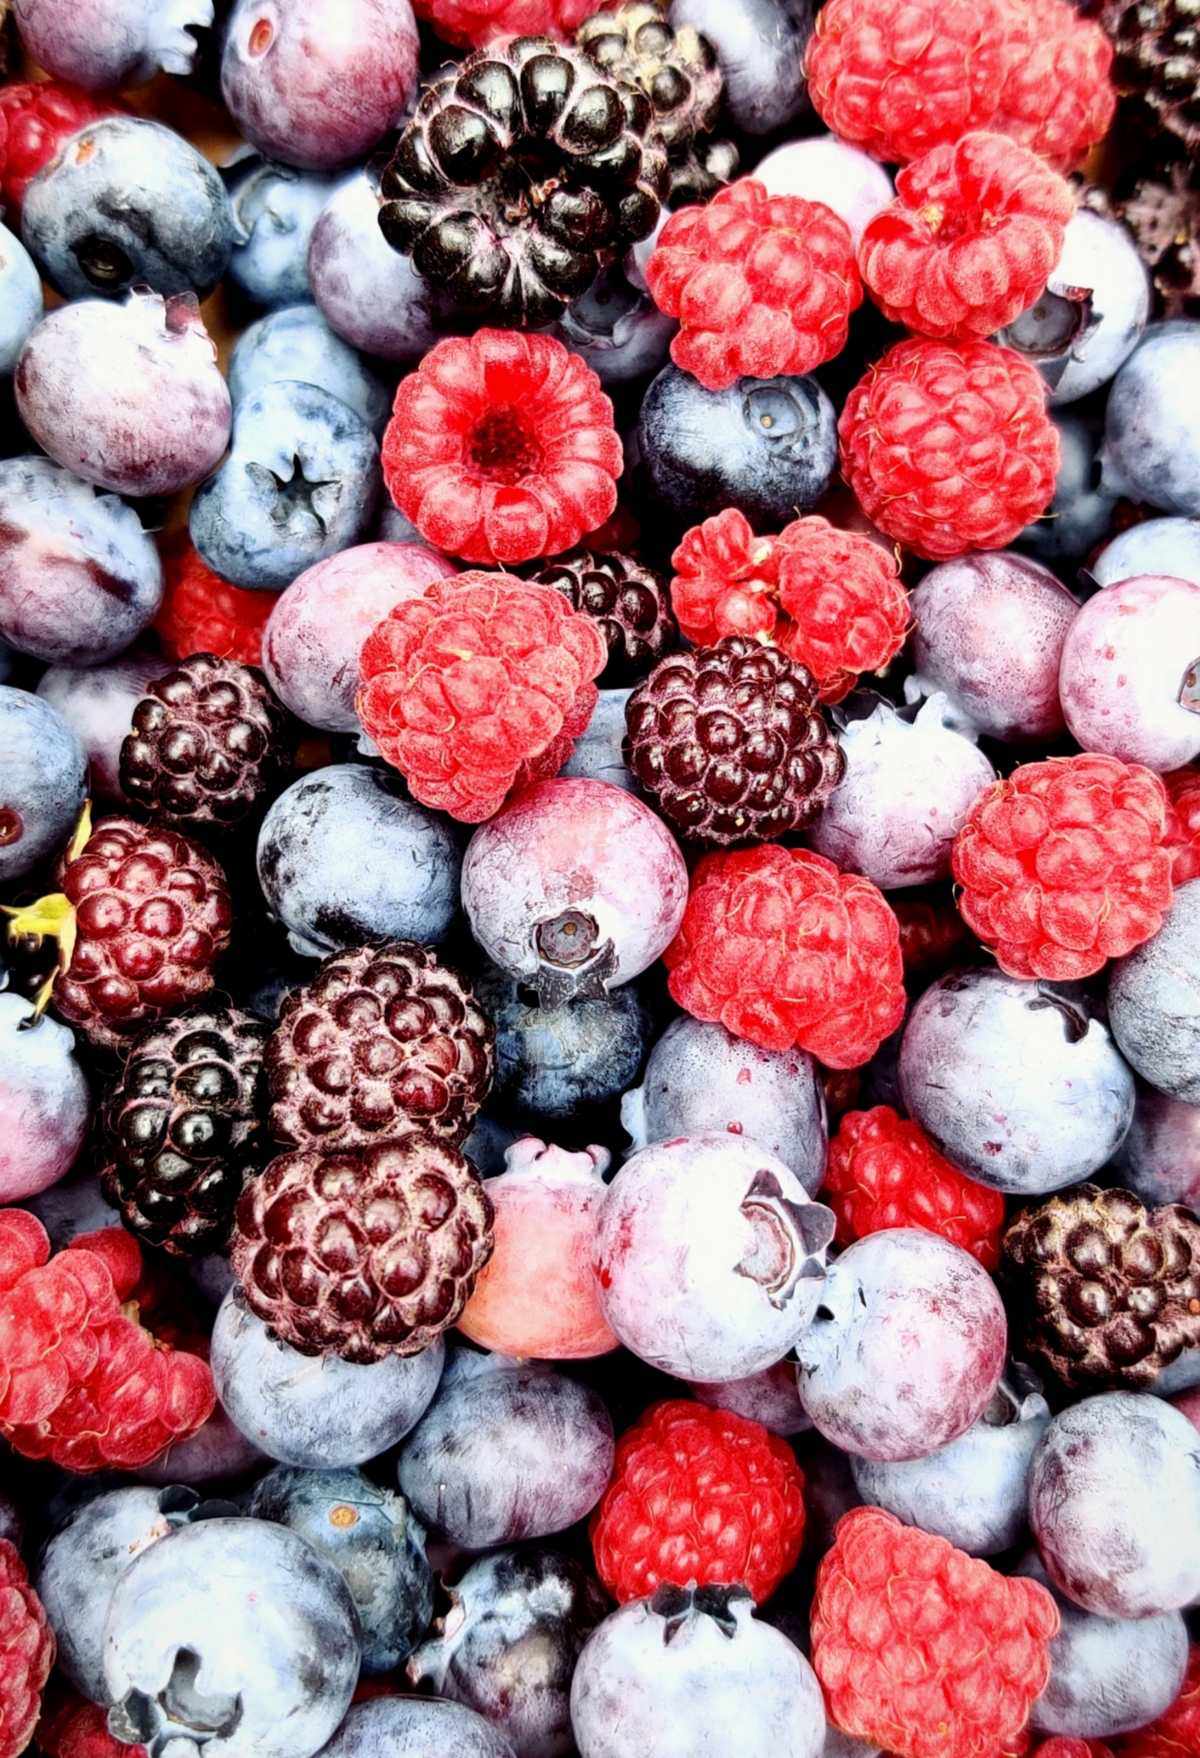 how to wash berries to make them last longer